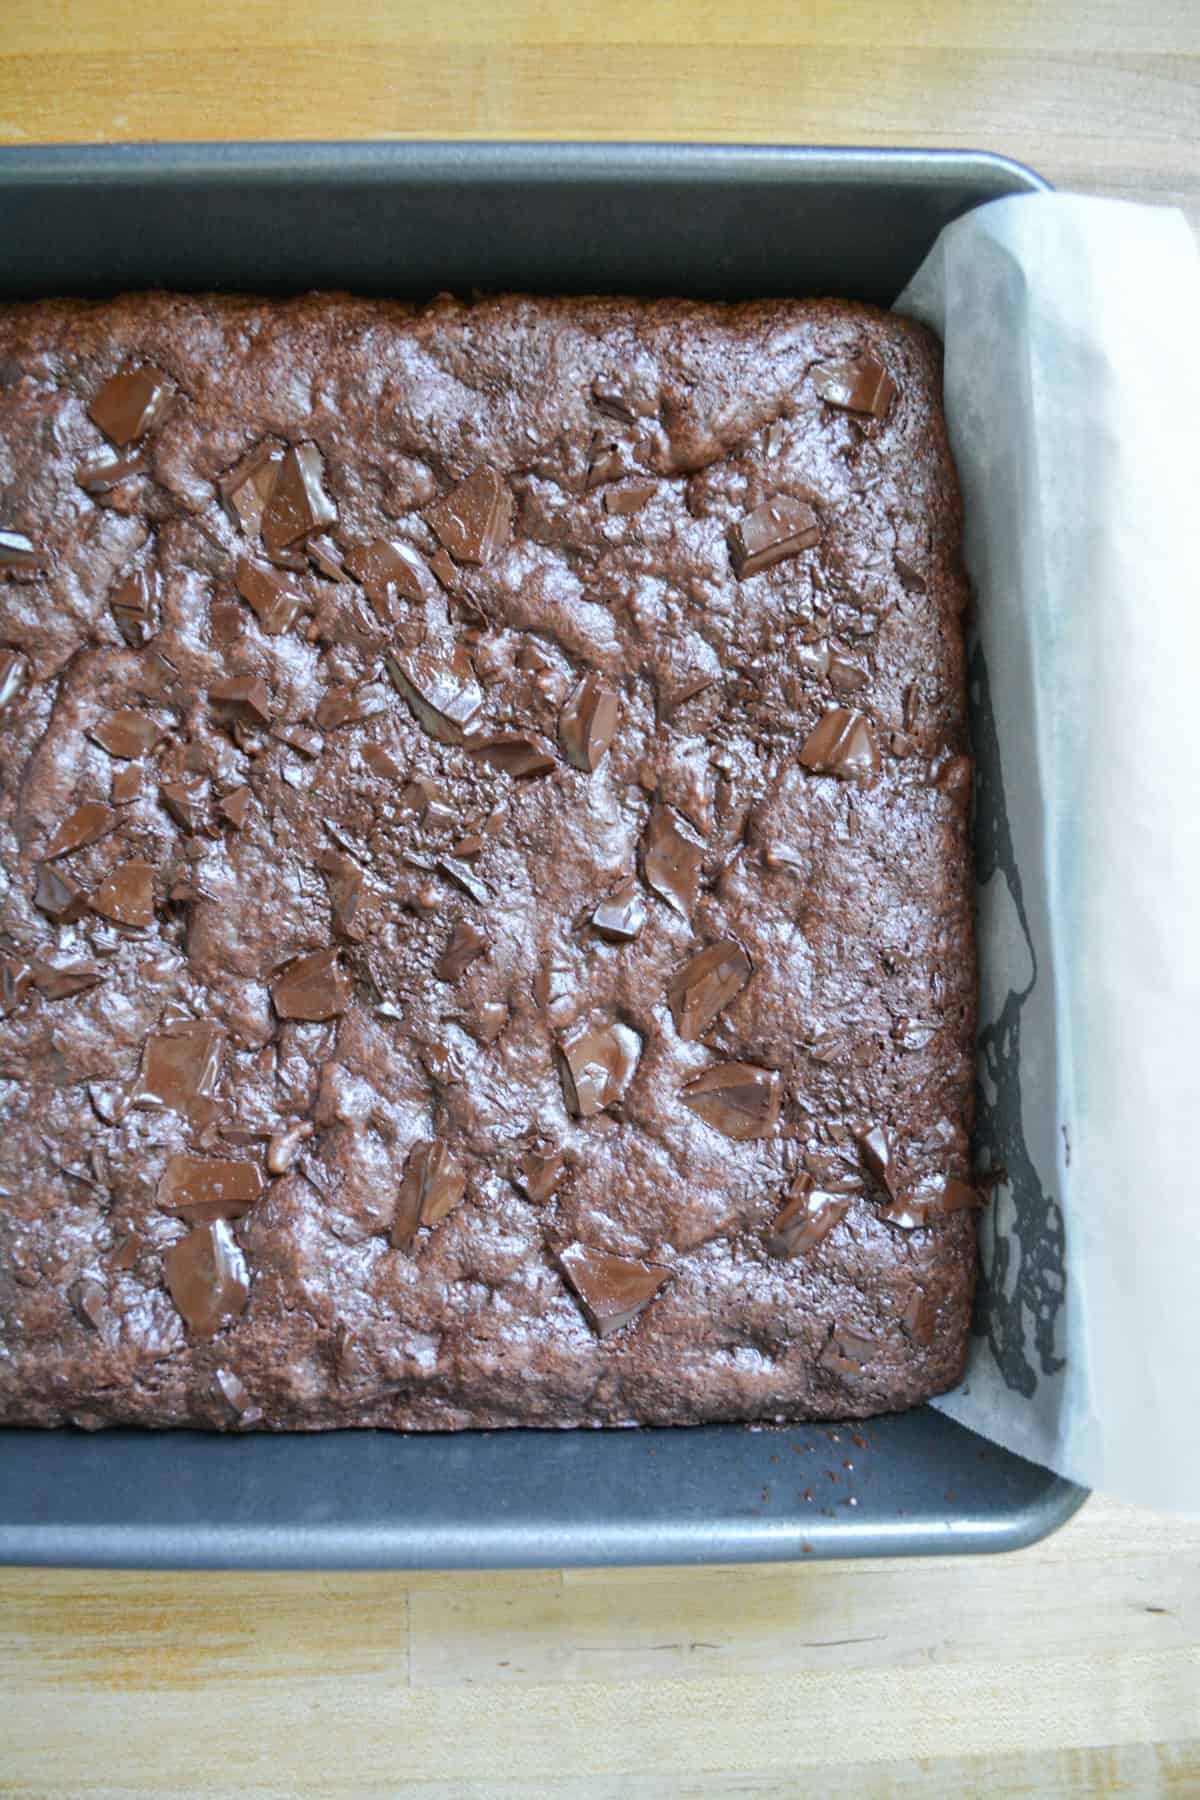 baked brownies in a square pan.